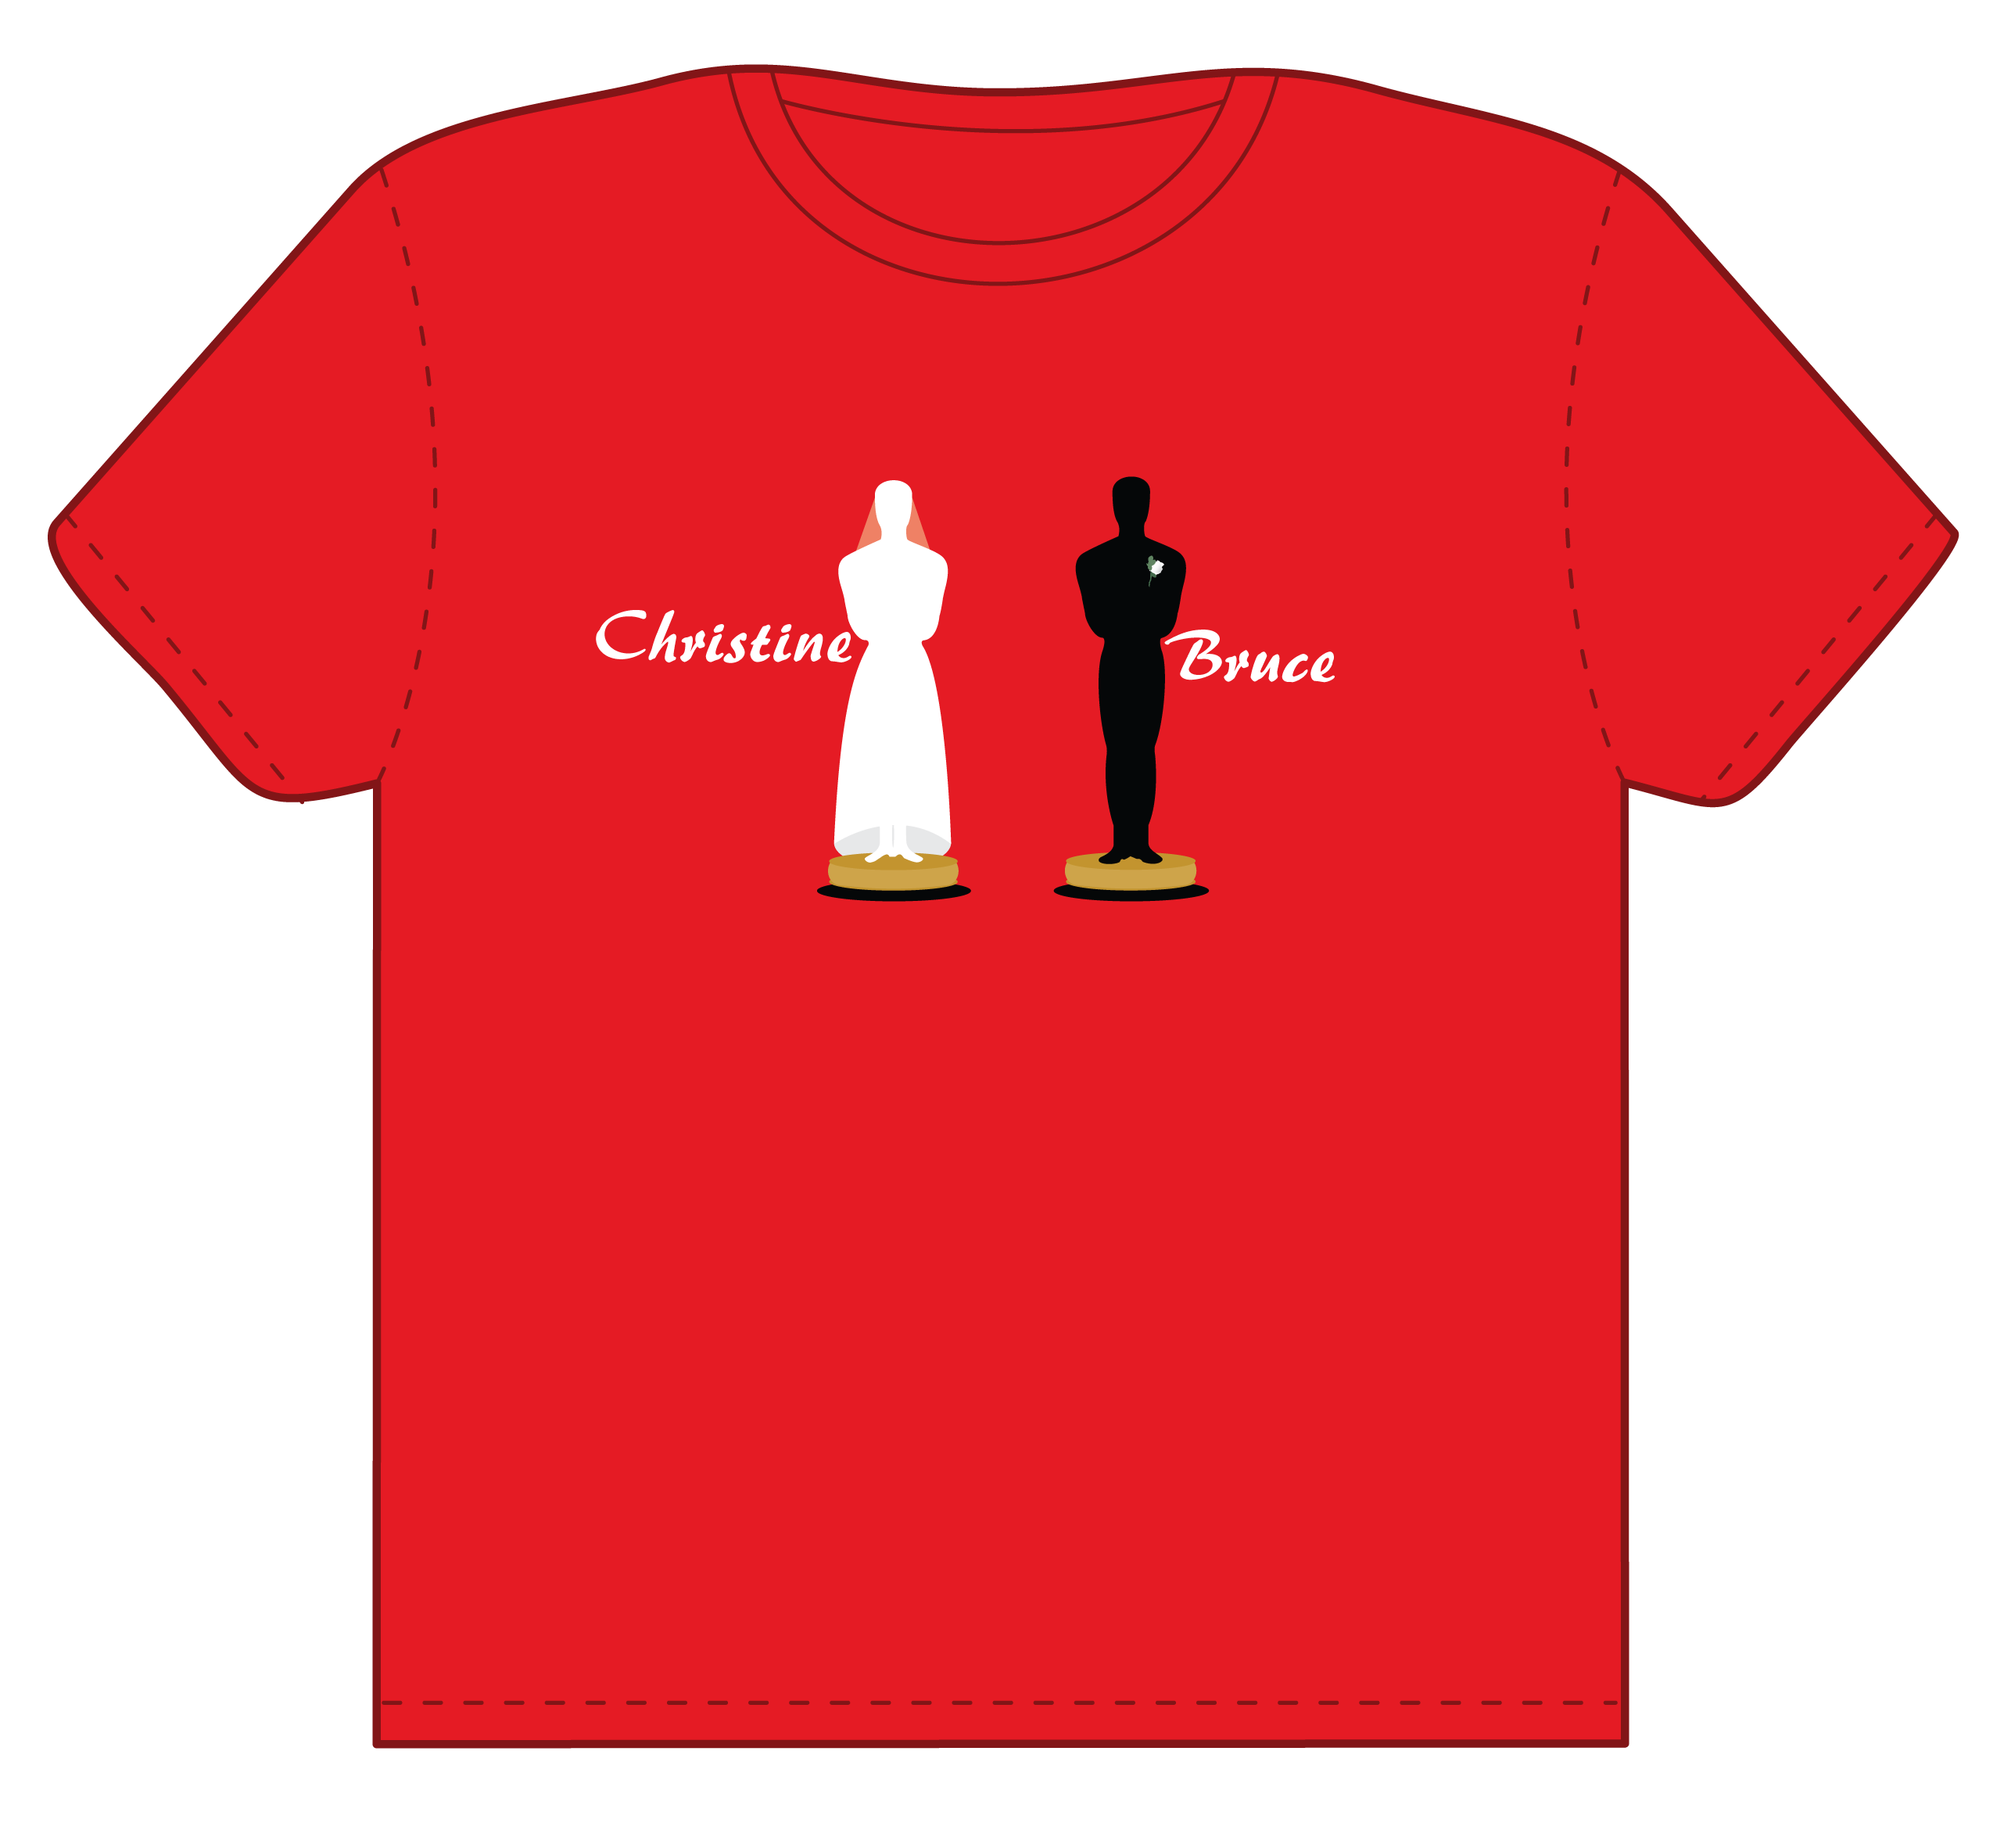 T-shirt designs for Bruce and Christine